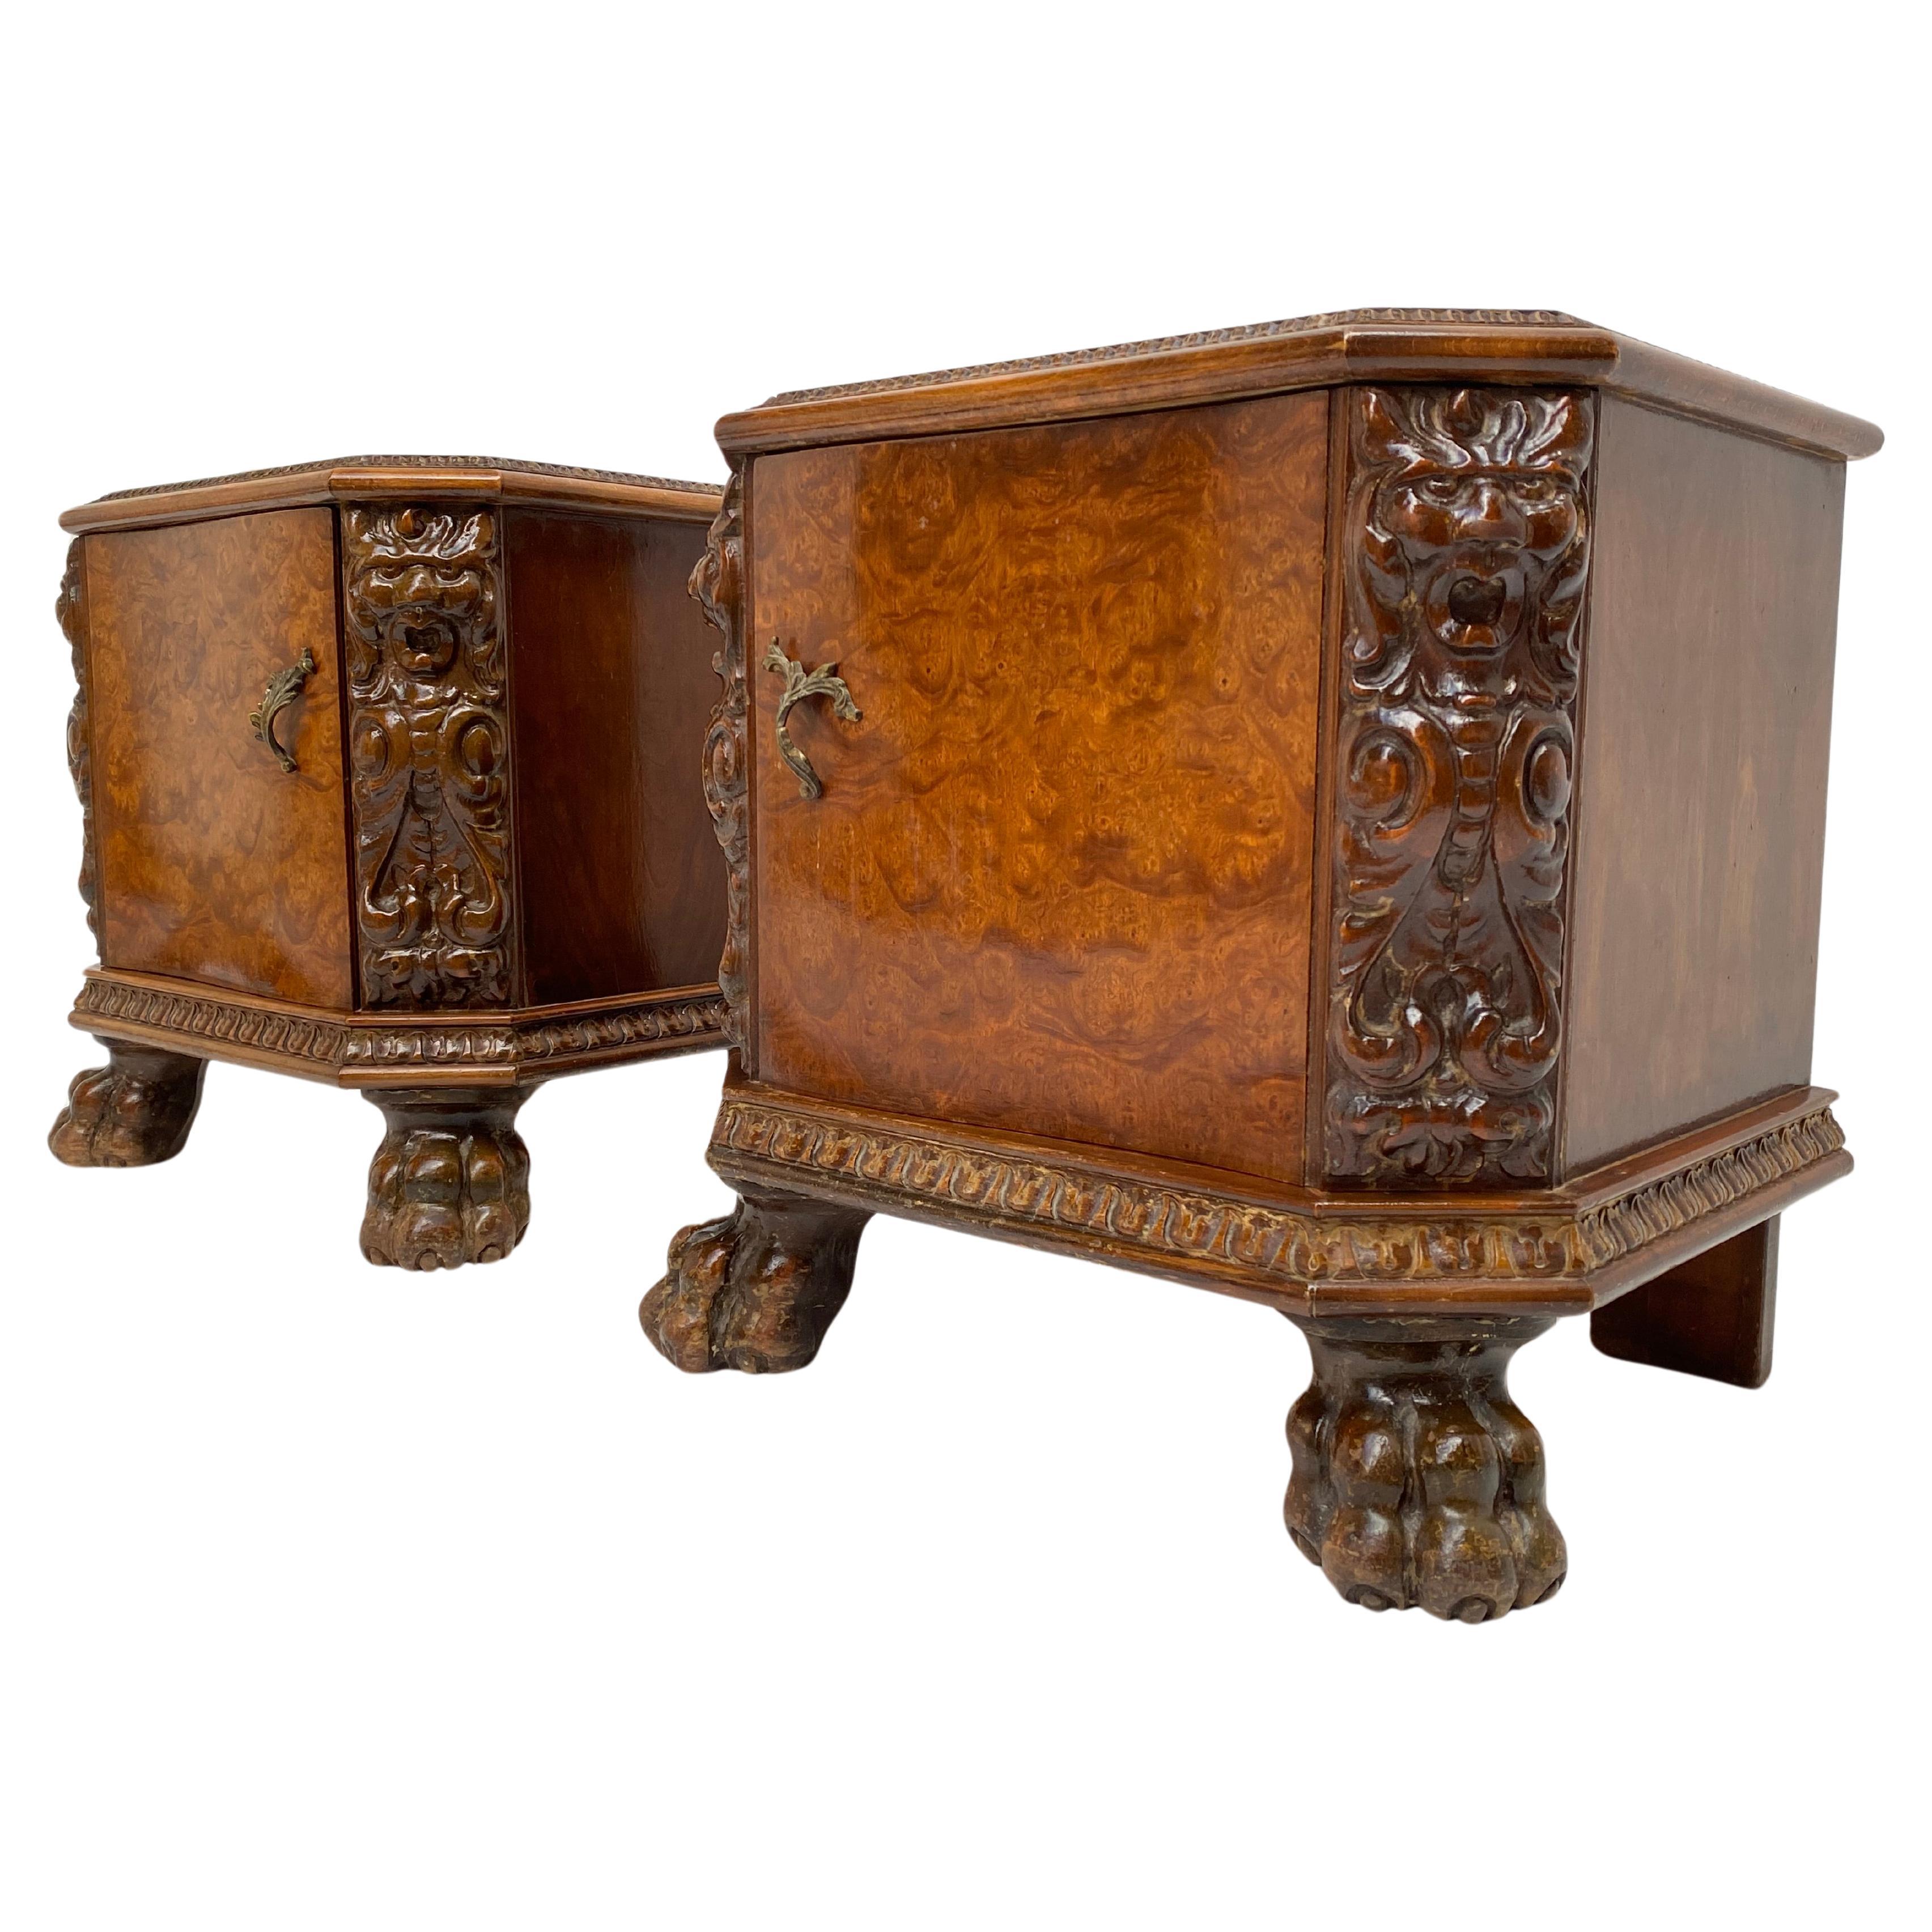 Pair of nightstands in a mixed Chippendale / Baroque style

Lion head and paw feet carved in Walnut and the doors finished in Burl veneer 

Brass filigree and door handles 

There are brass corners to the backside of the top indicating these